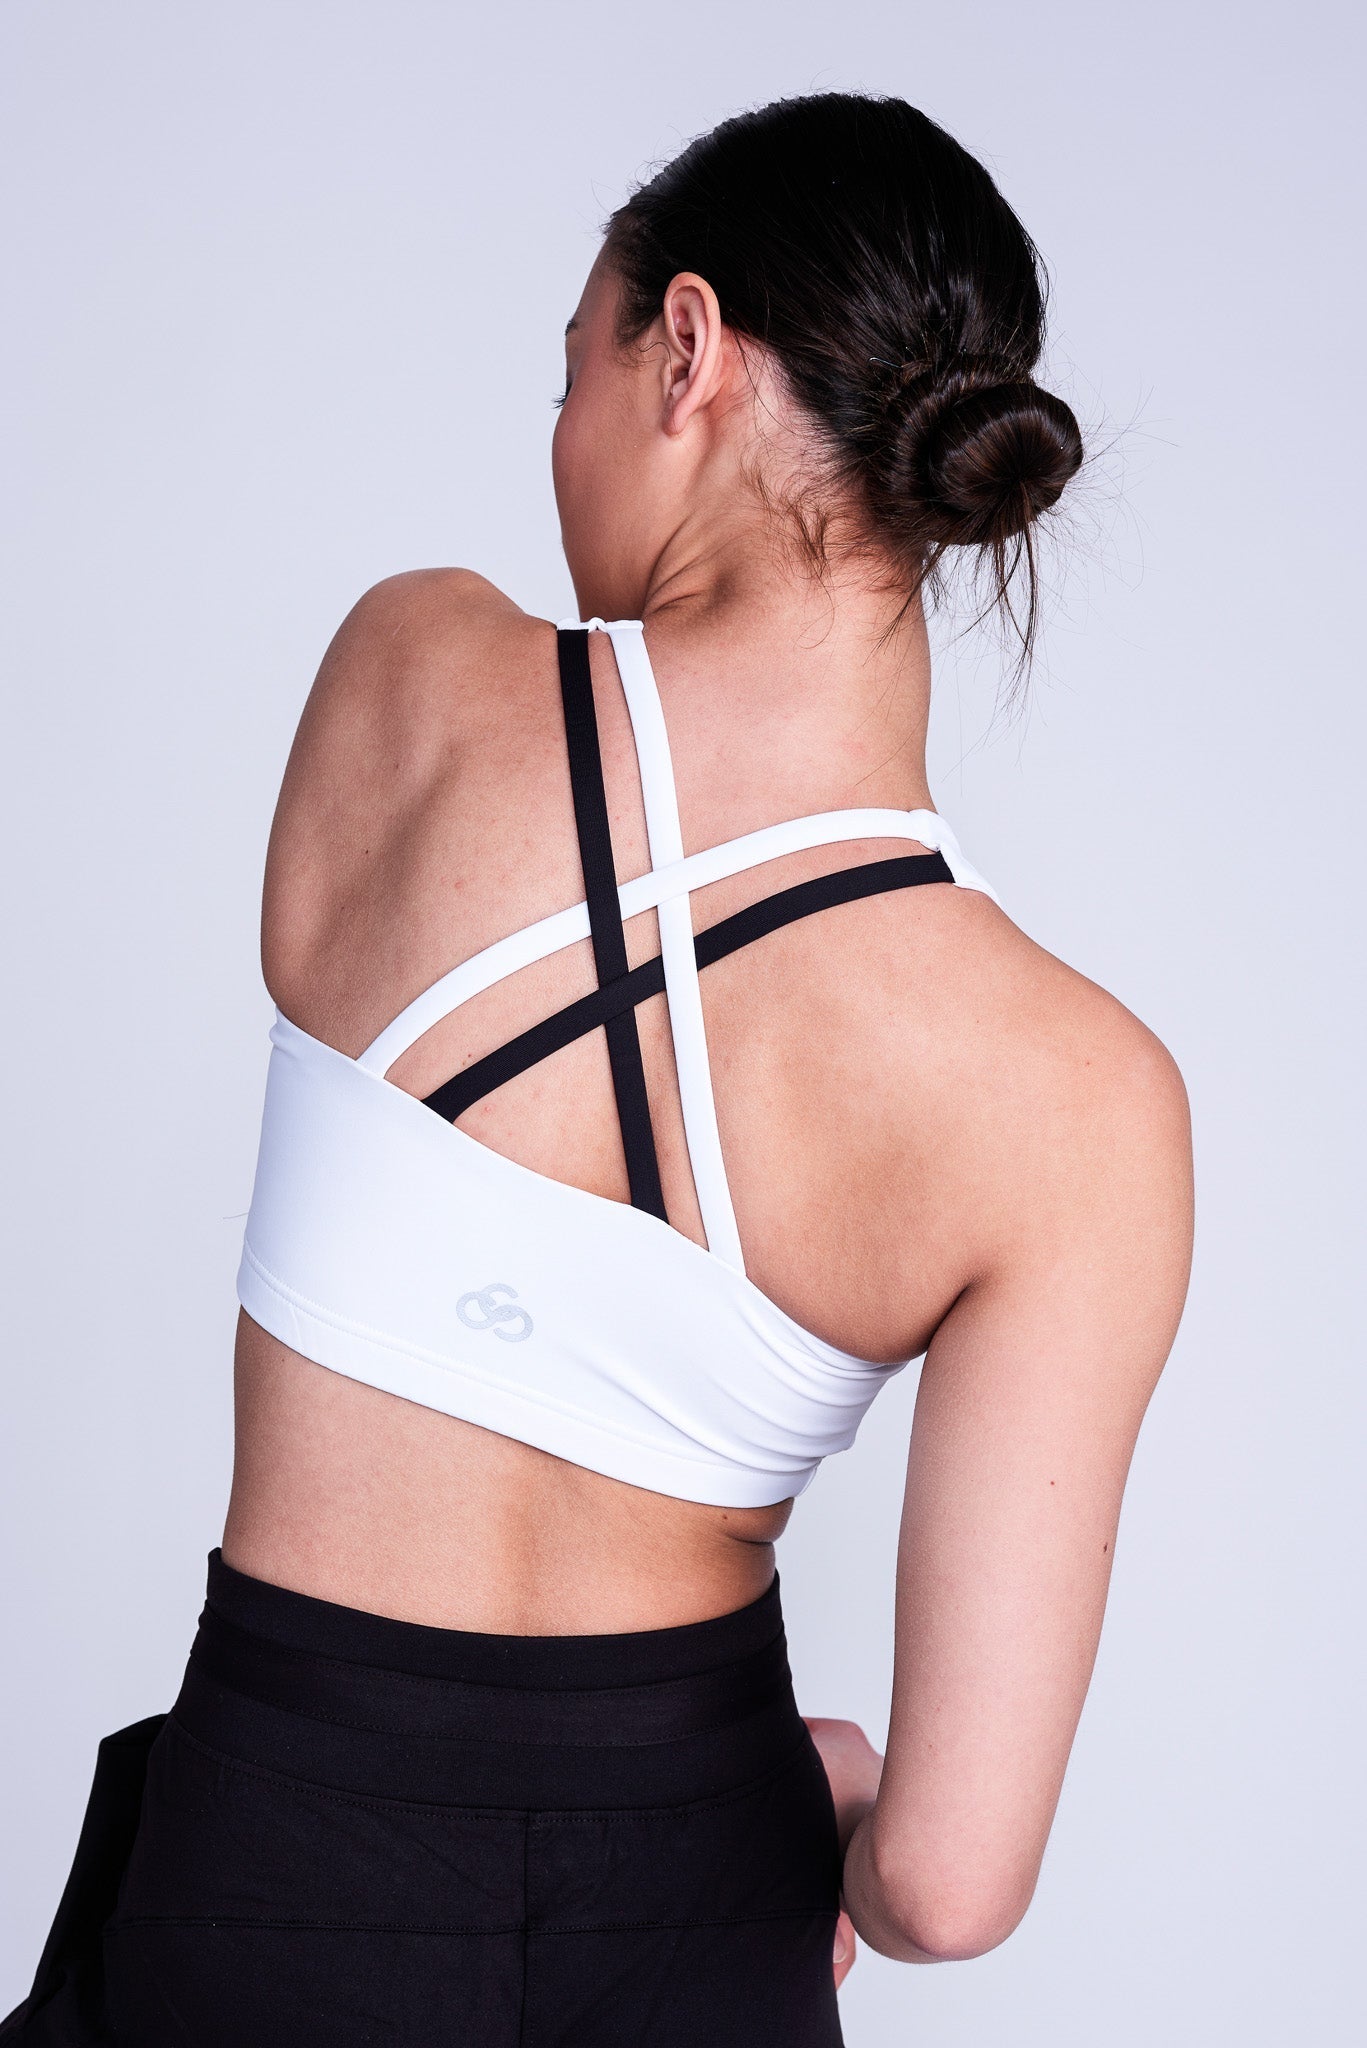 Strappy sports bra • Compare & find best prices today »